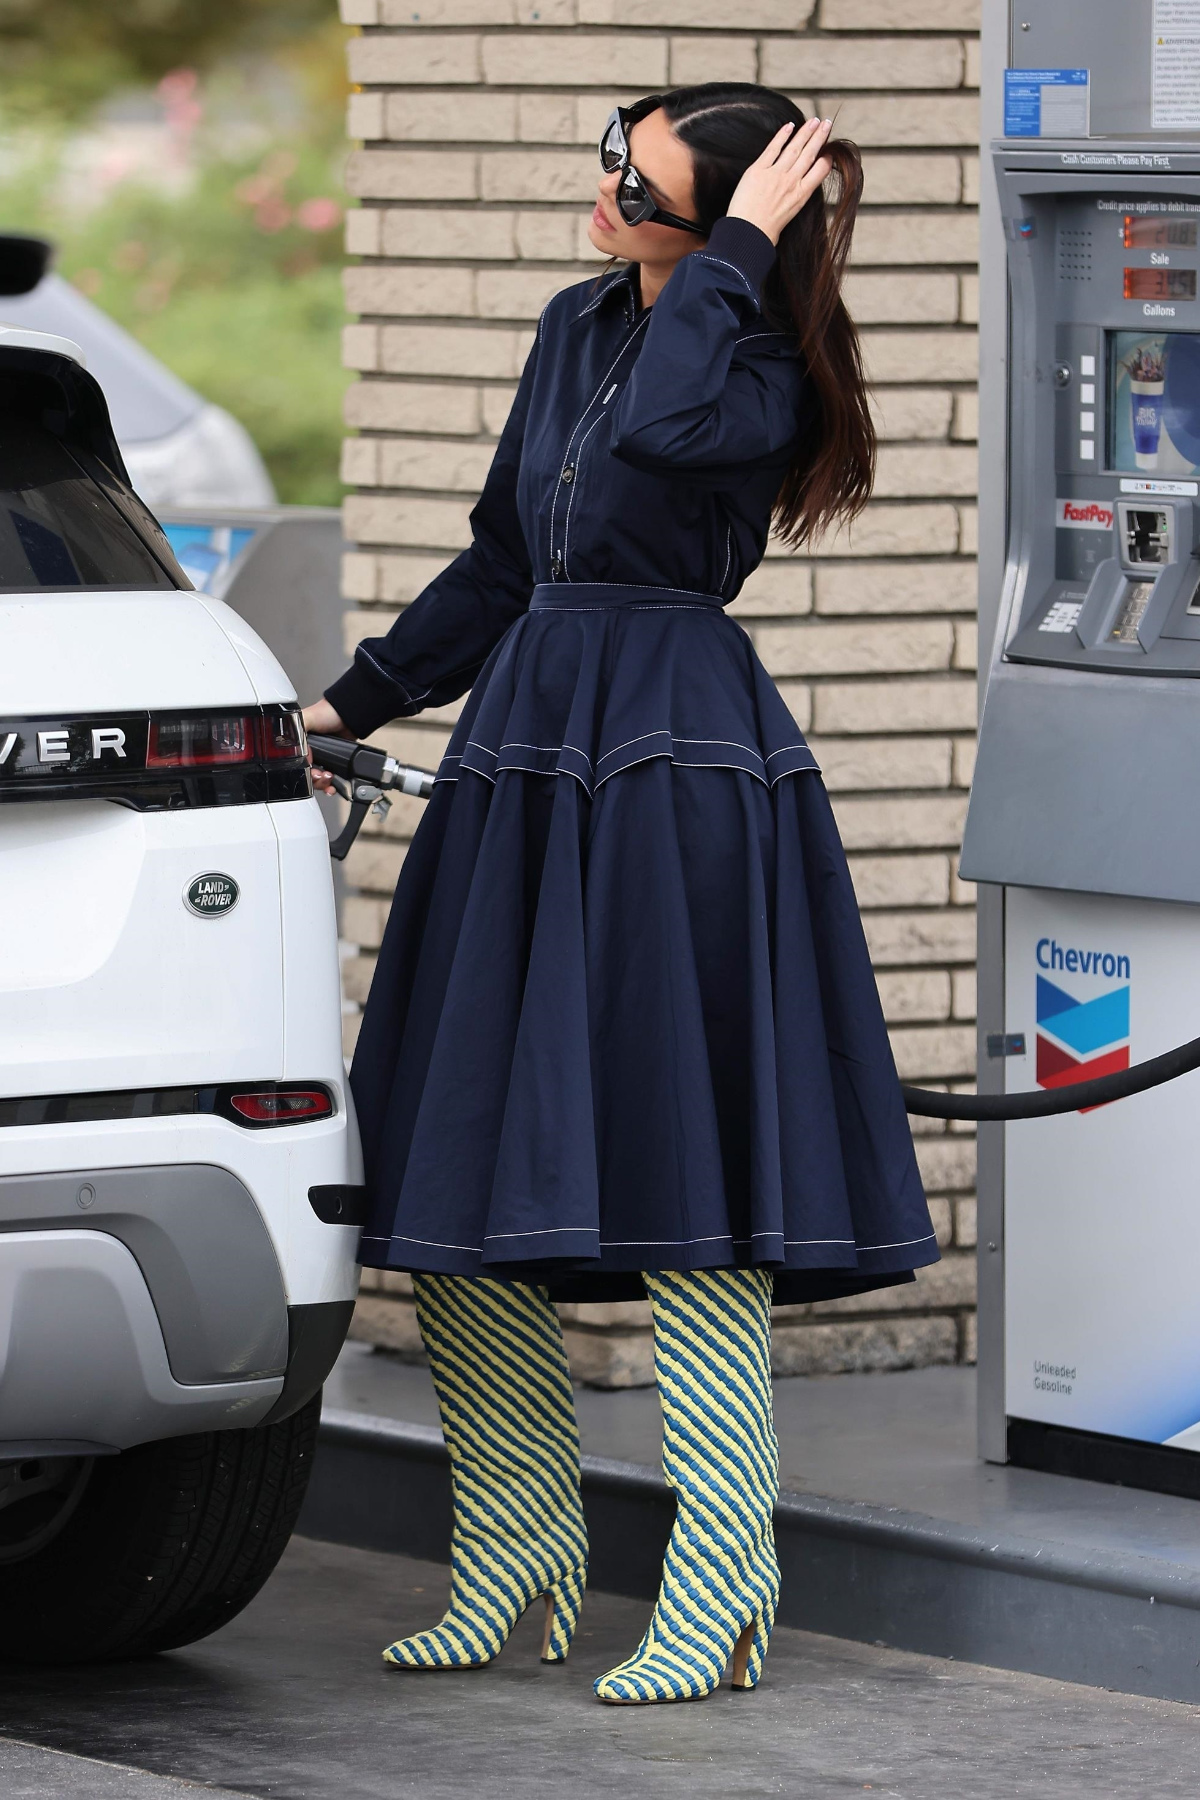 Kendall Jenner wearing Bottega Veneta's new Over-The-Knee boots at the gas station.